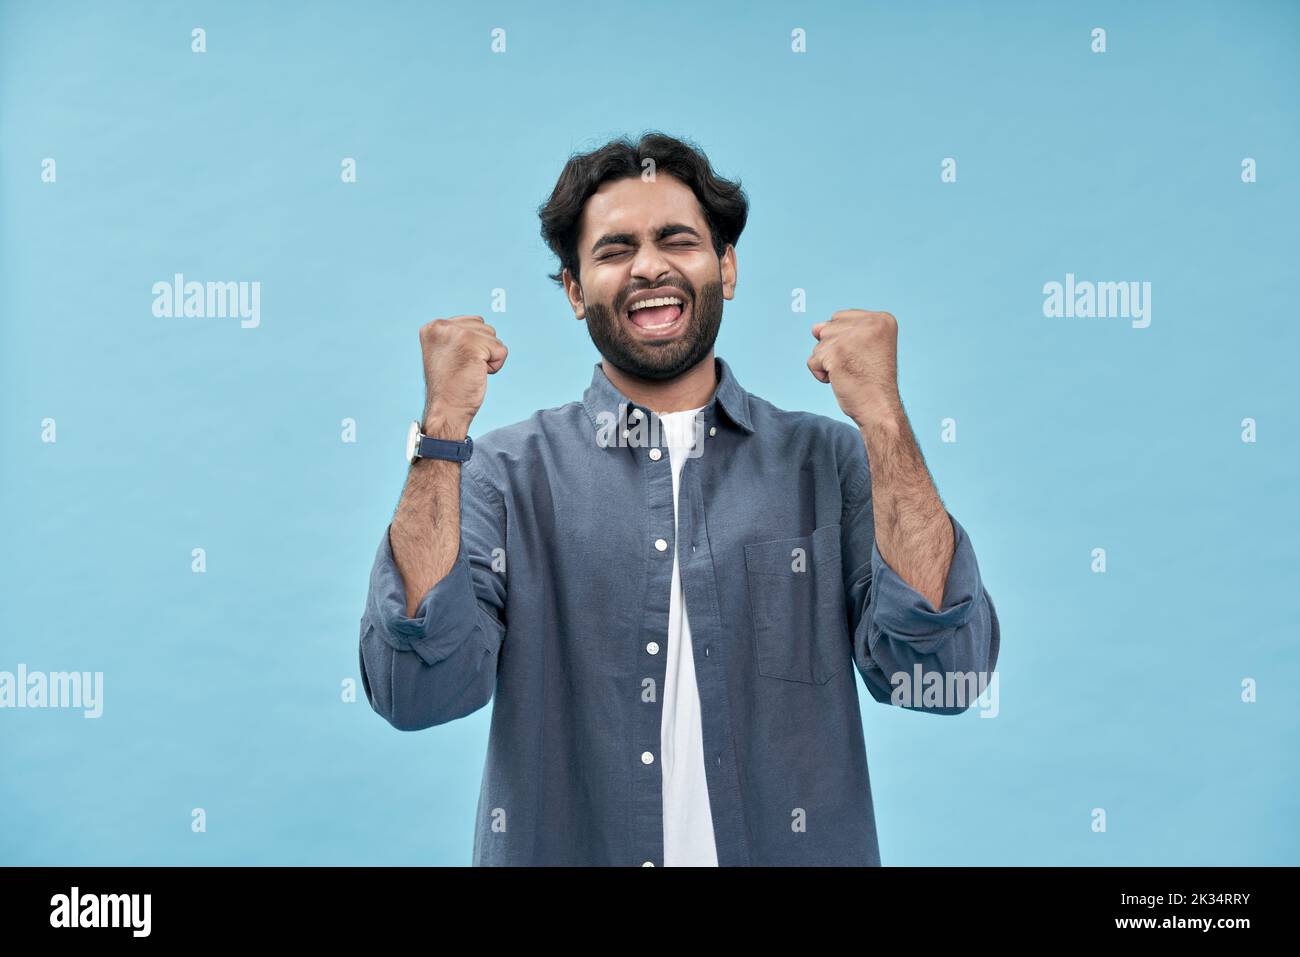 Happy excited arab young man raising fists isolated on blue background. Stock Photo